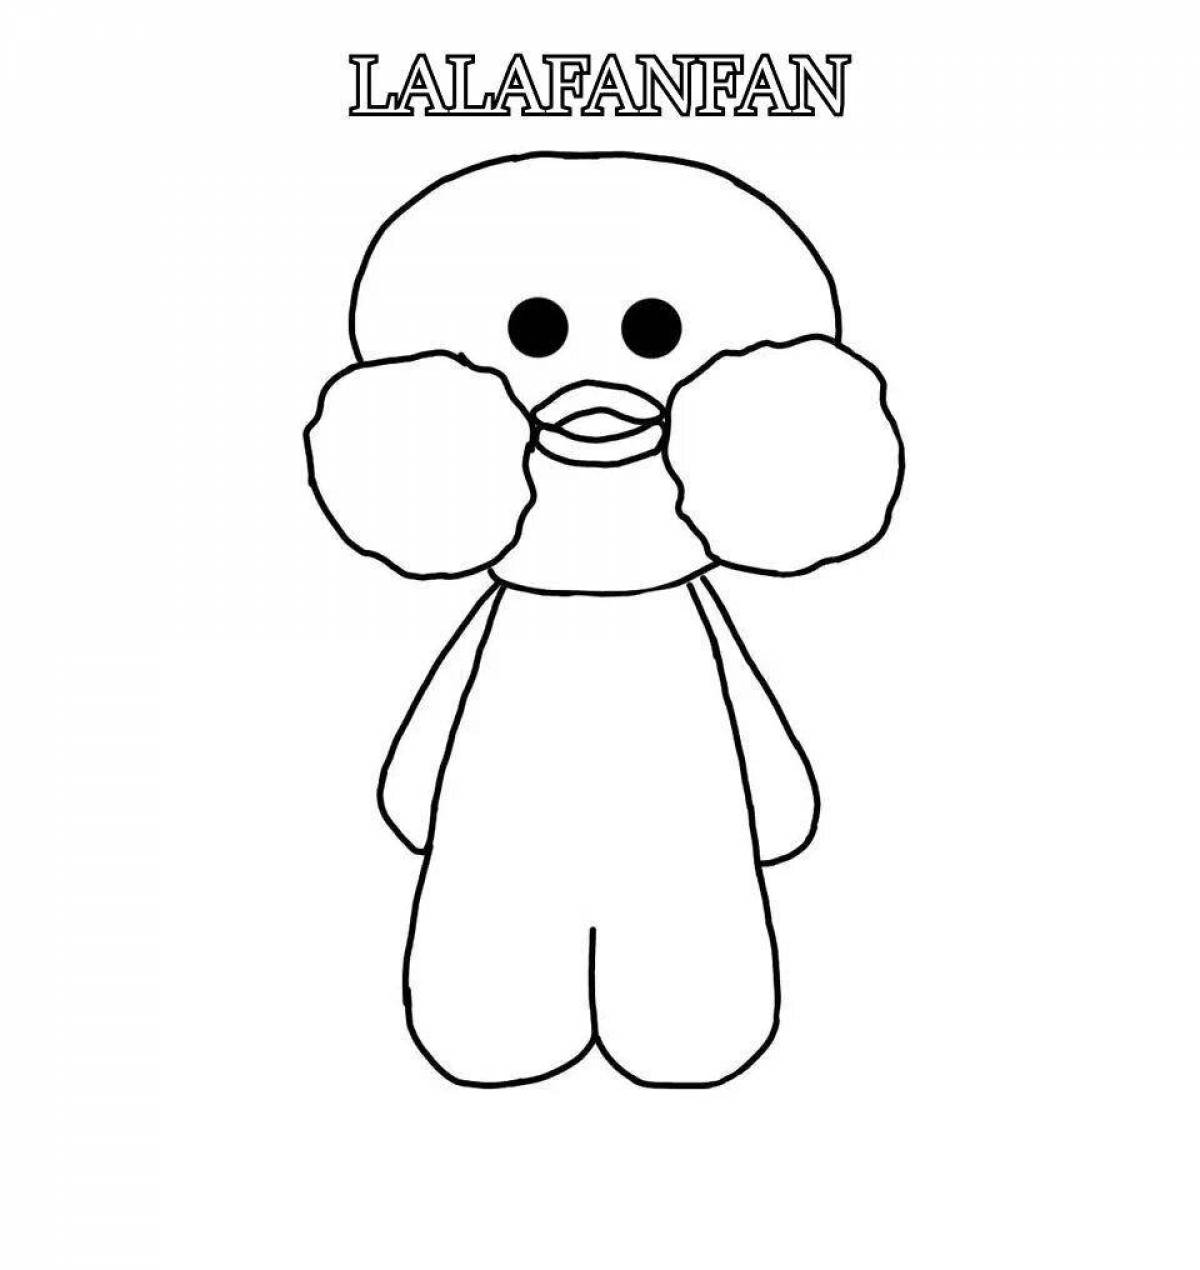 Coloring book glowing duck lalafanfan